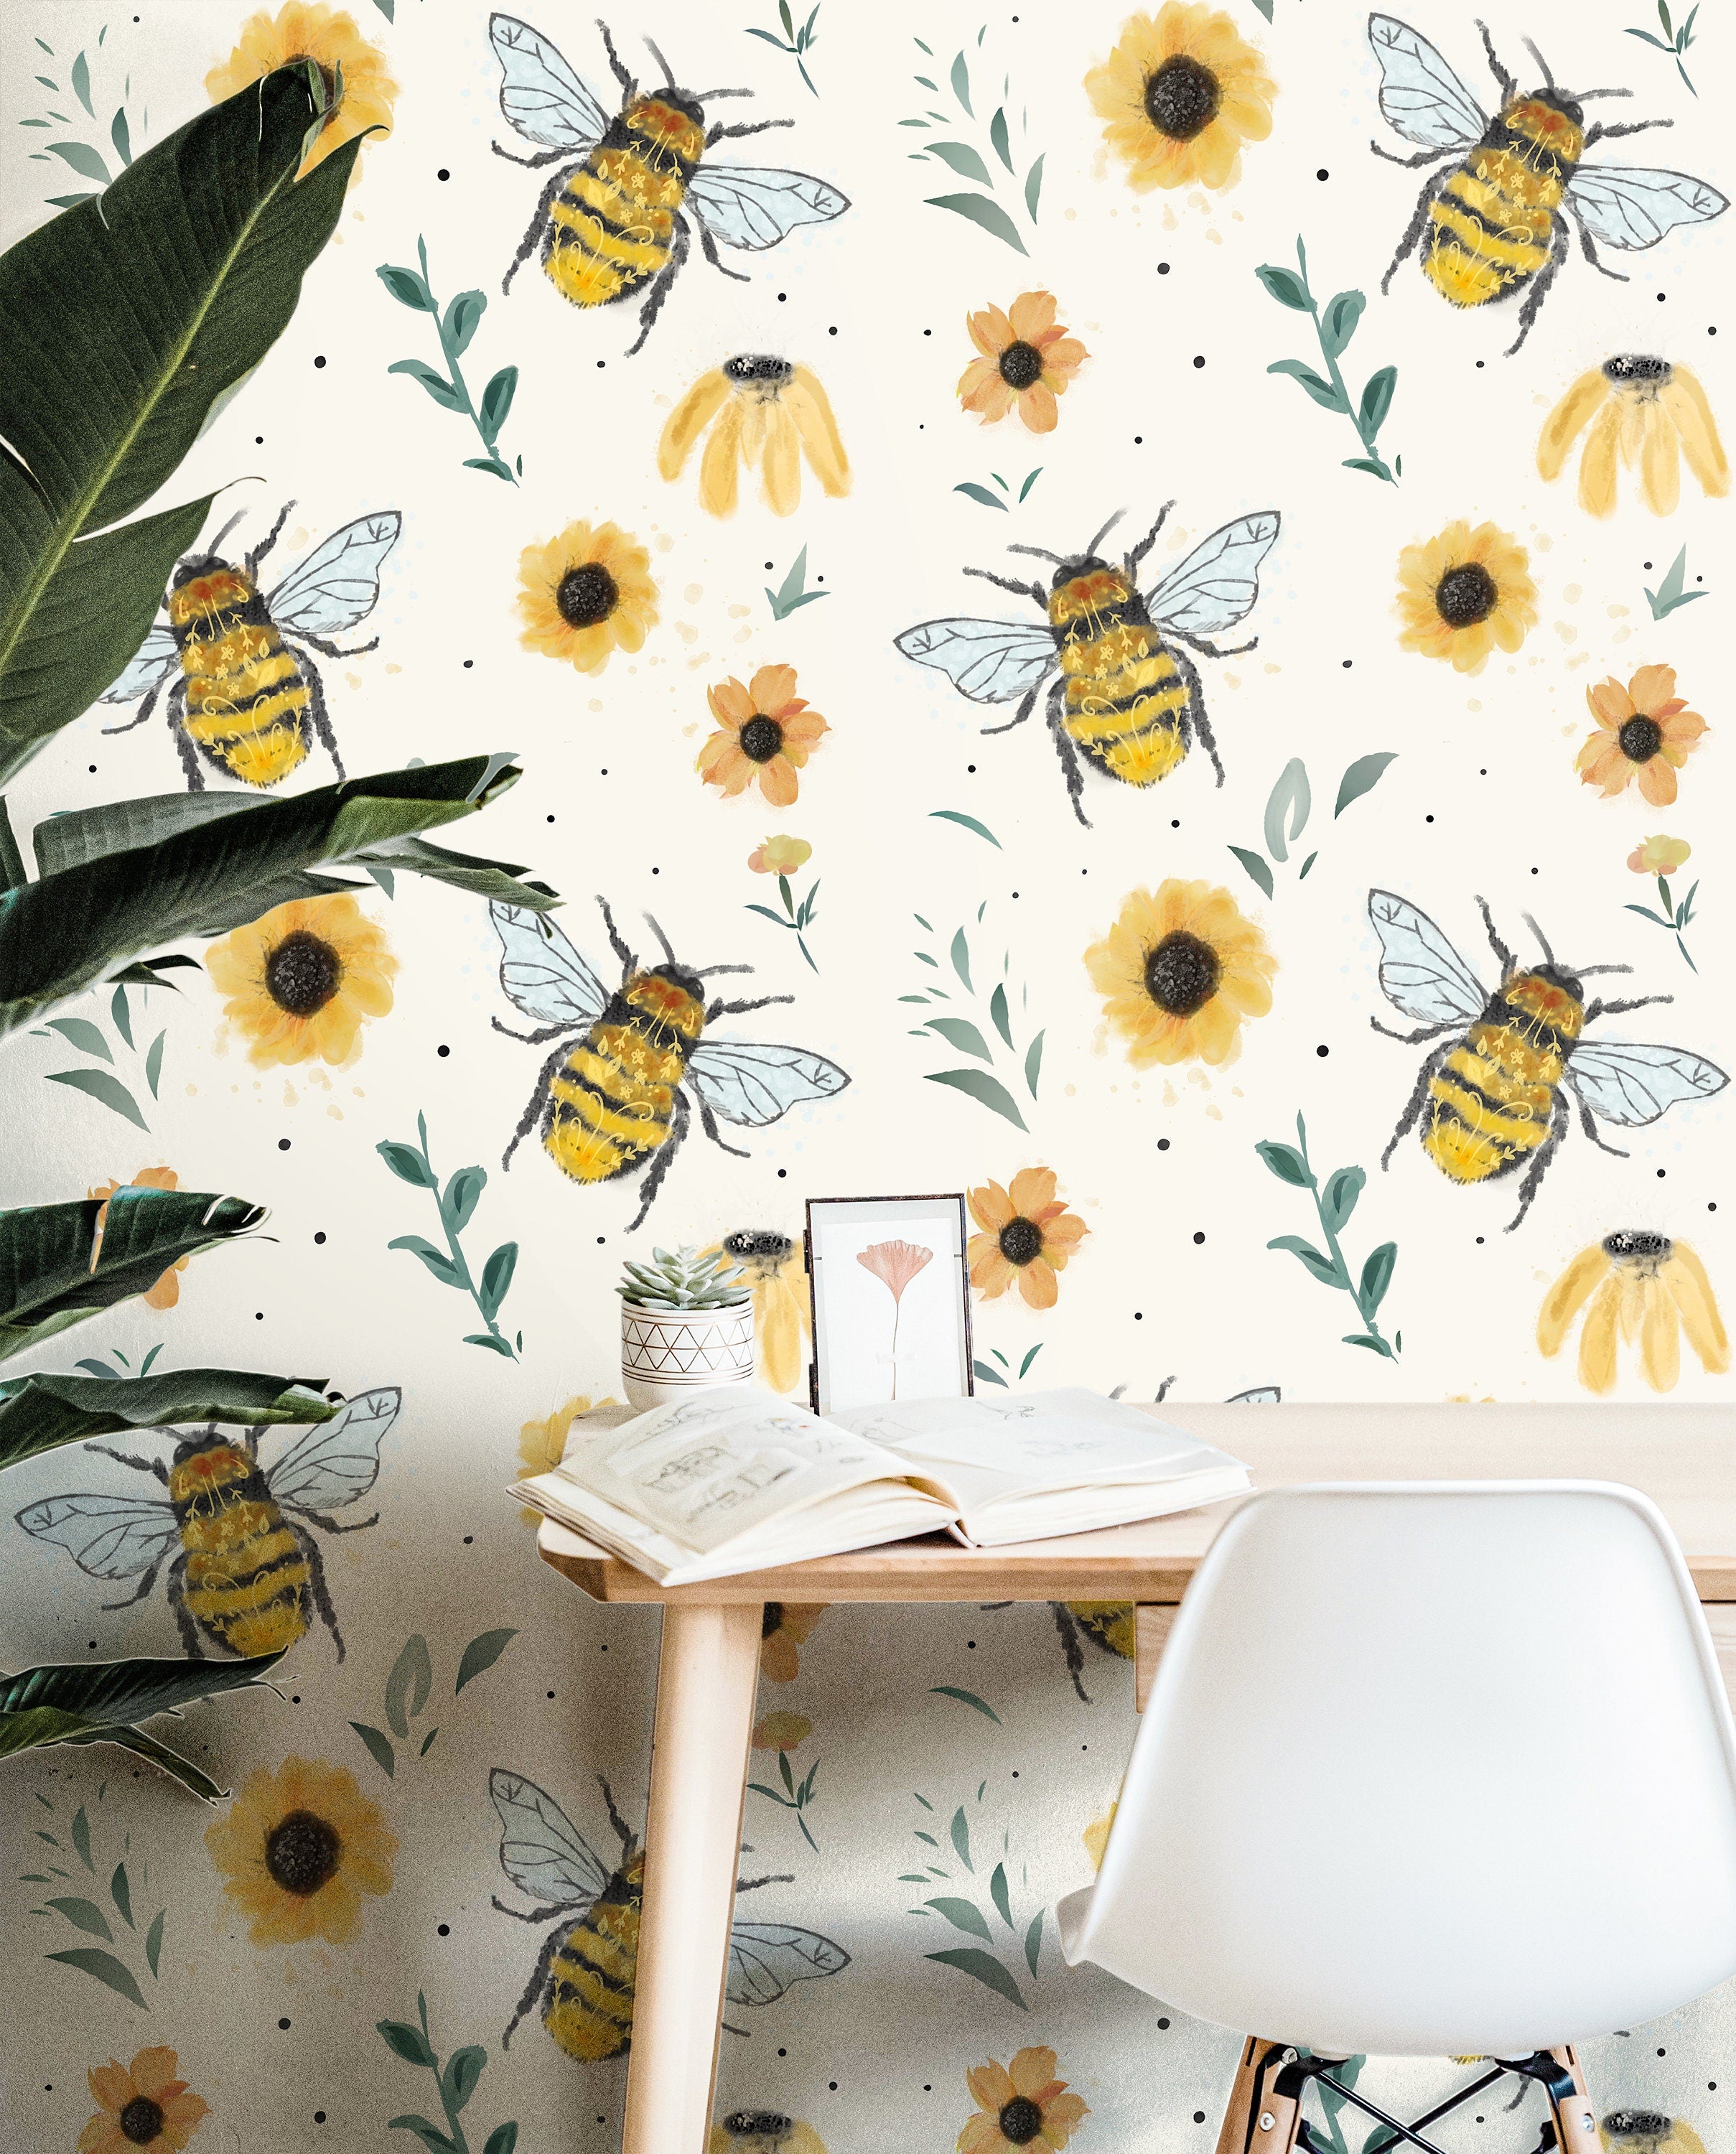 Floral Bumblebee Wallpaper Peel and Stick Wallpaper Removable Wallpaper Wall Decor Home Decor Wall Art Printable Wall Art Room Decor 148 - JamesAndColors